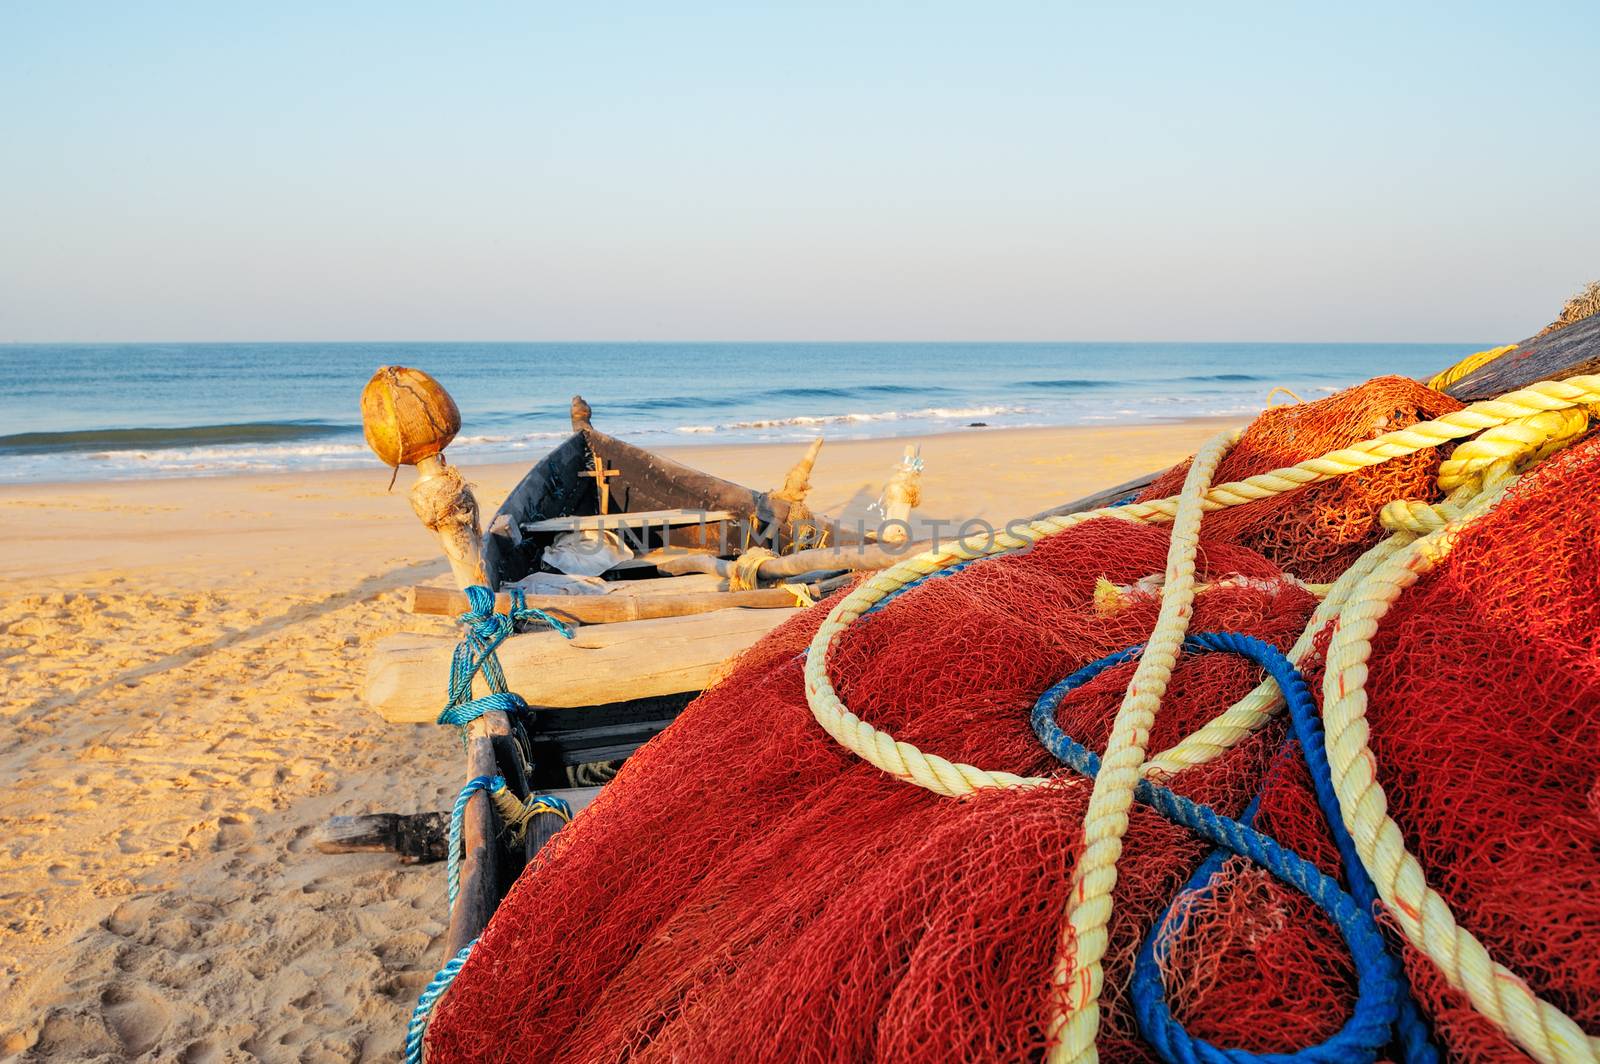 Old fishing boat with red net on the shore of Goa, India